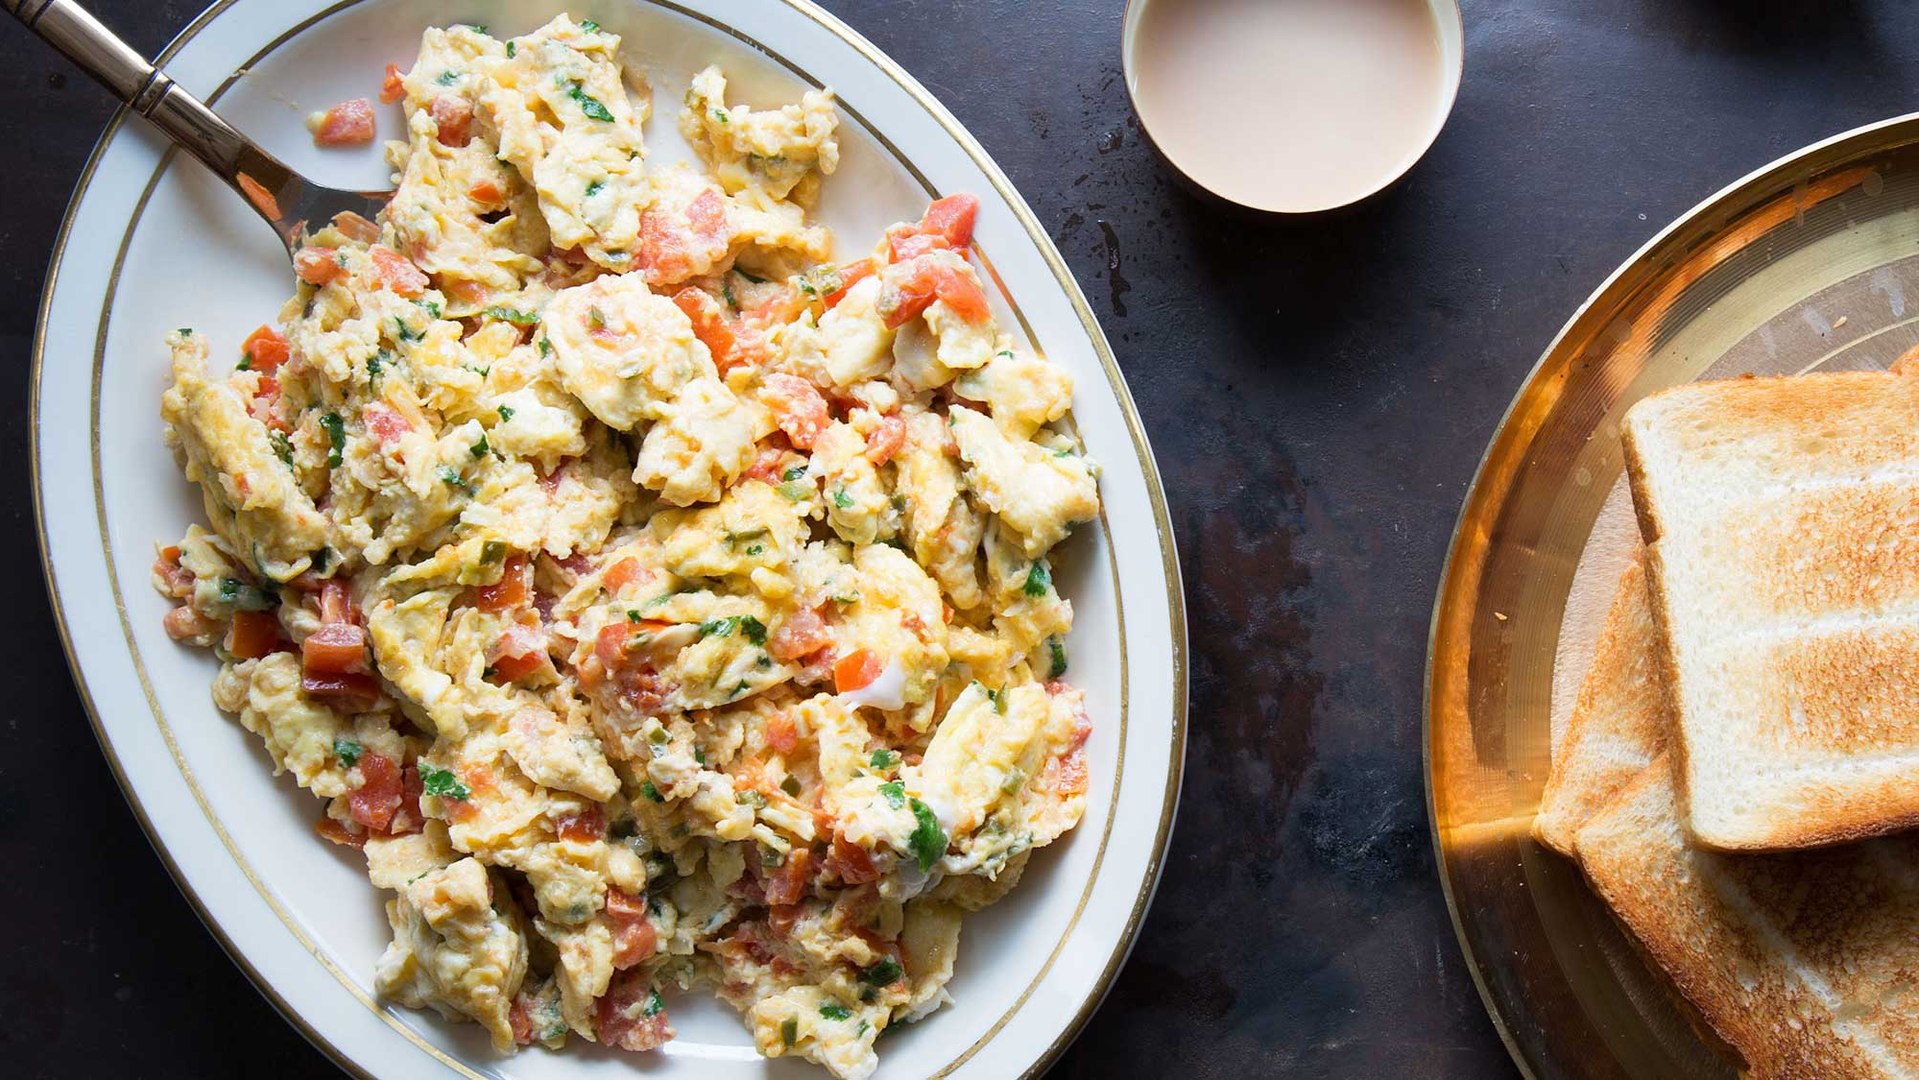 How to Make Parsi-Style Scrambled Eggs